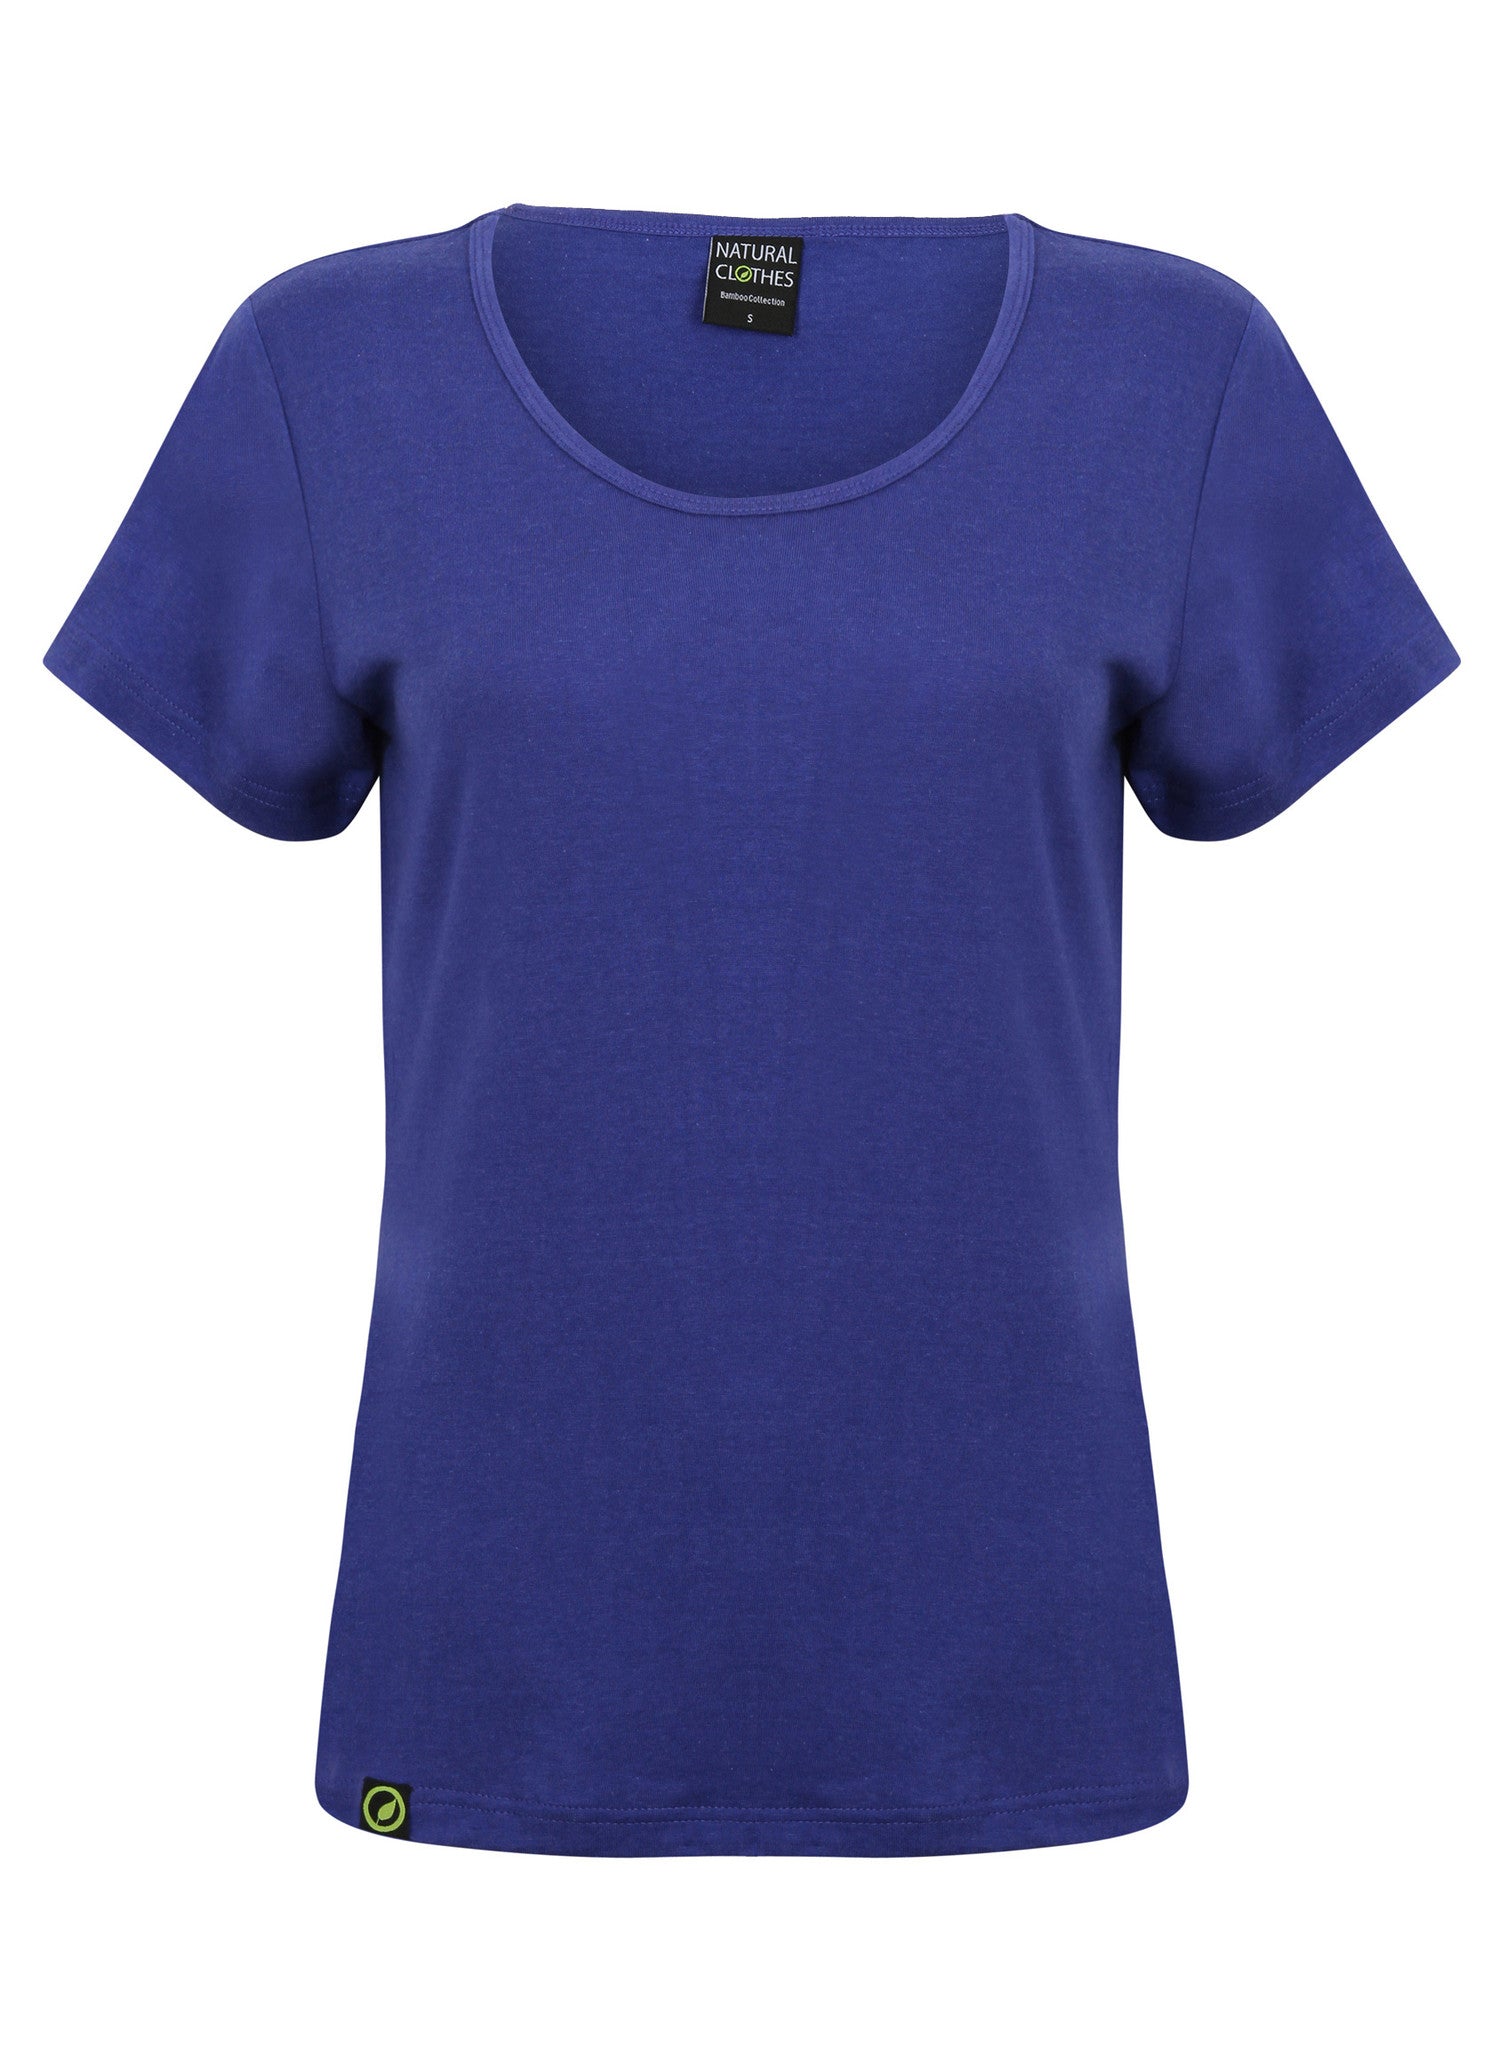 Bamboo Short Sleeve Top Blue - Natural Clothes Bamboo Clothing & Accessories for Men & Women 